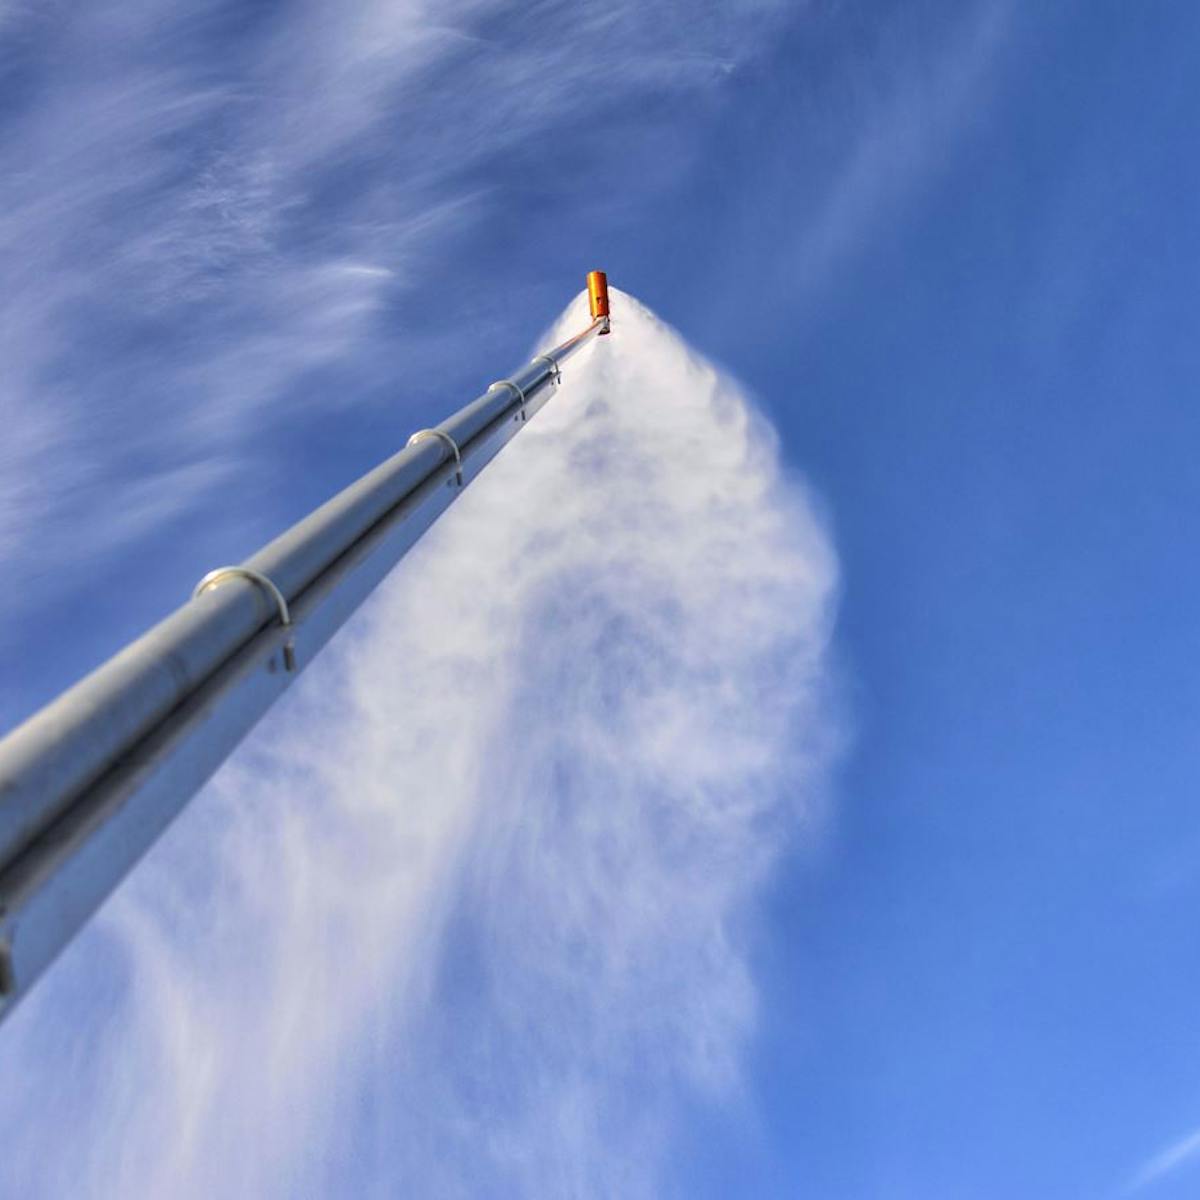 Bottom up image of a snow gun blowing snow. 